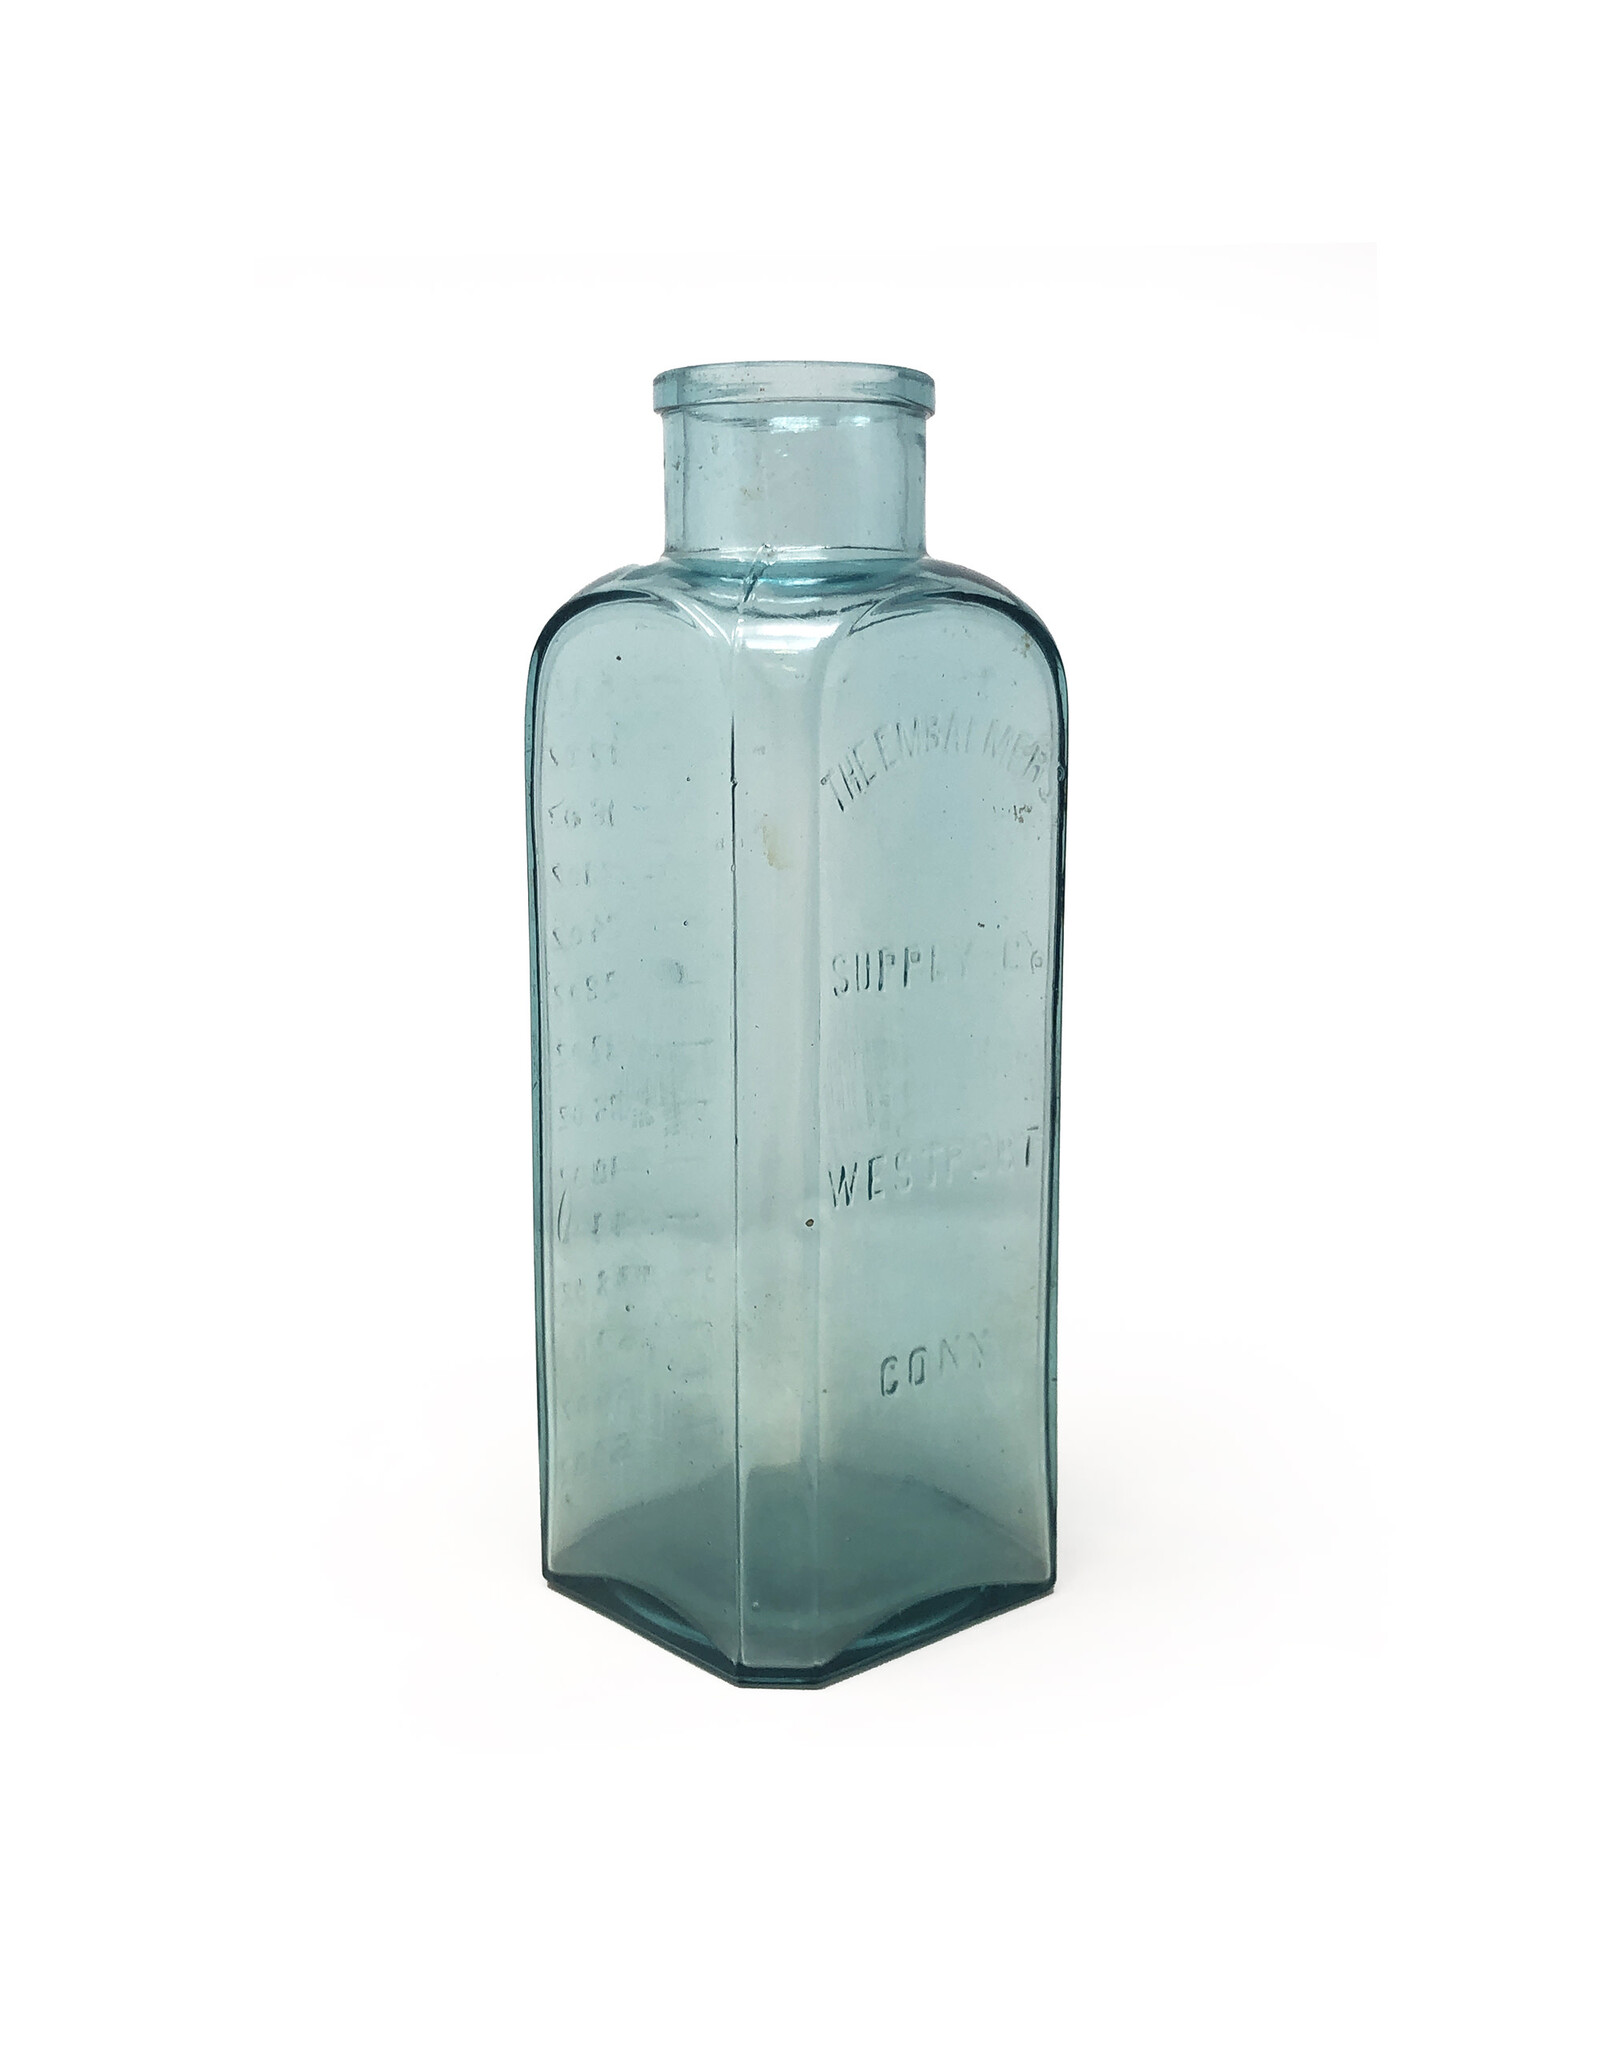 The Embalmers Supply Co. Large Antique Embalming Fluid Bottle